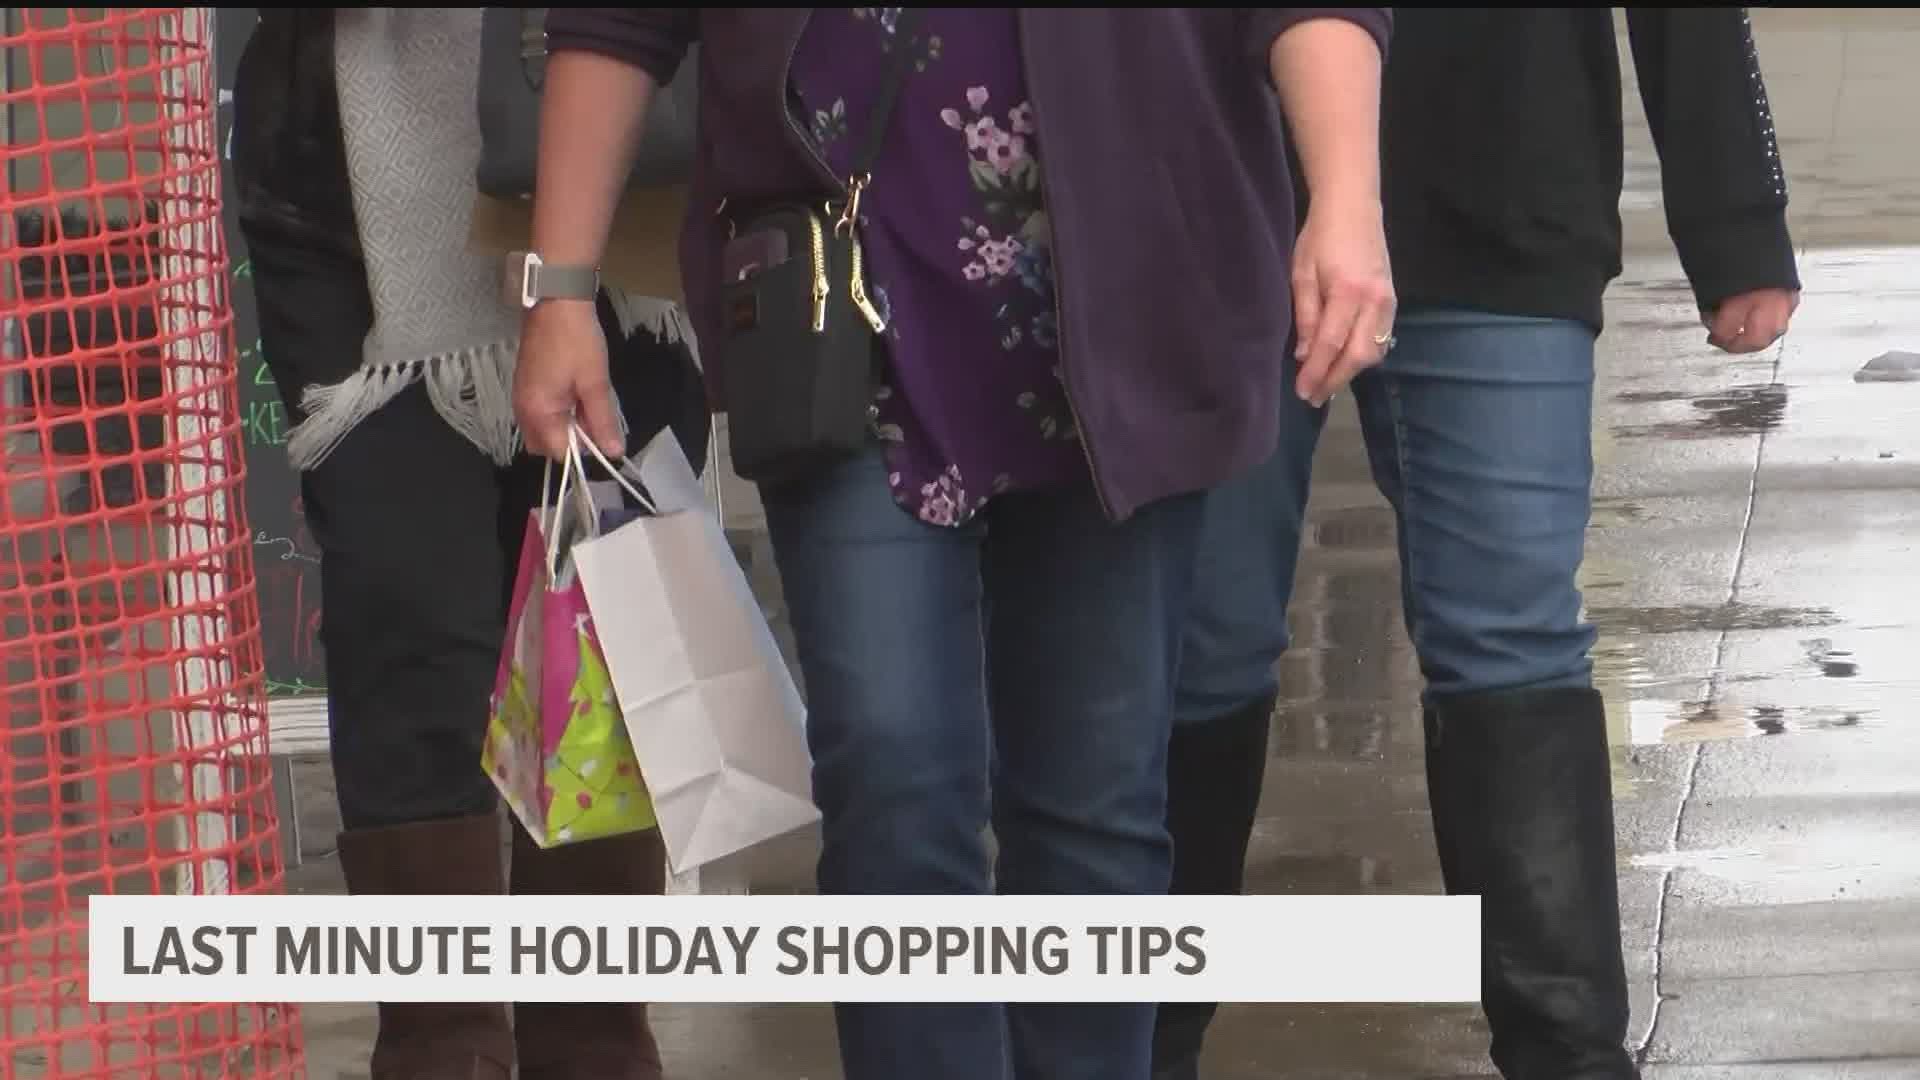 A tip to prevent overspending during last minute shopping is to keep emotions out of gift buying.